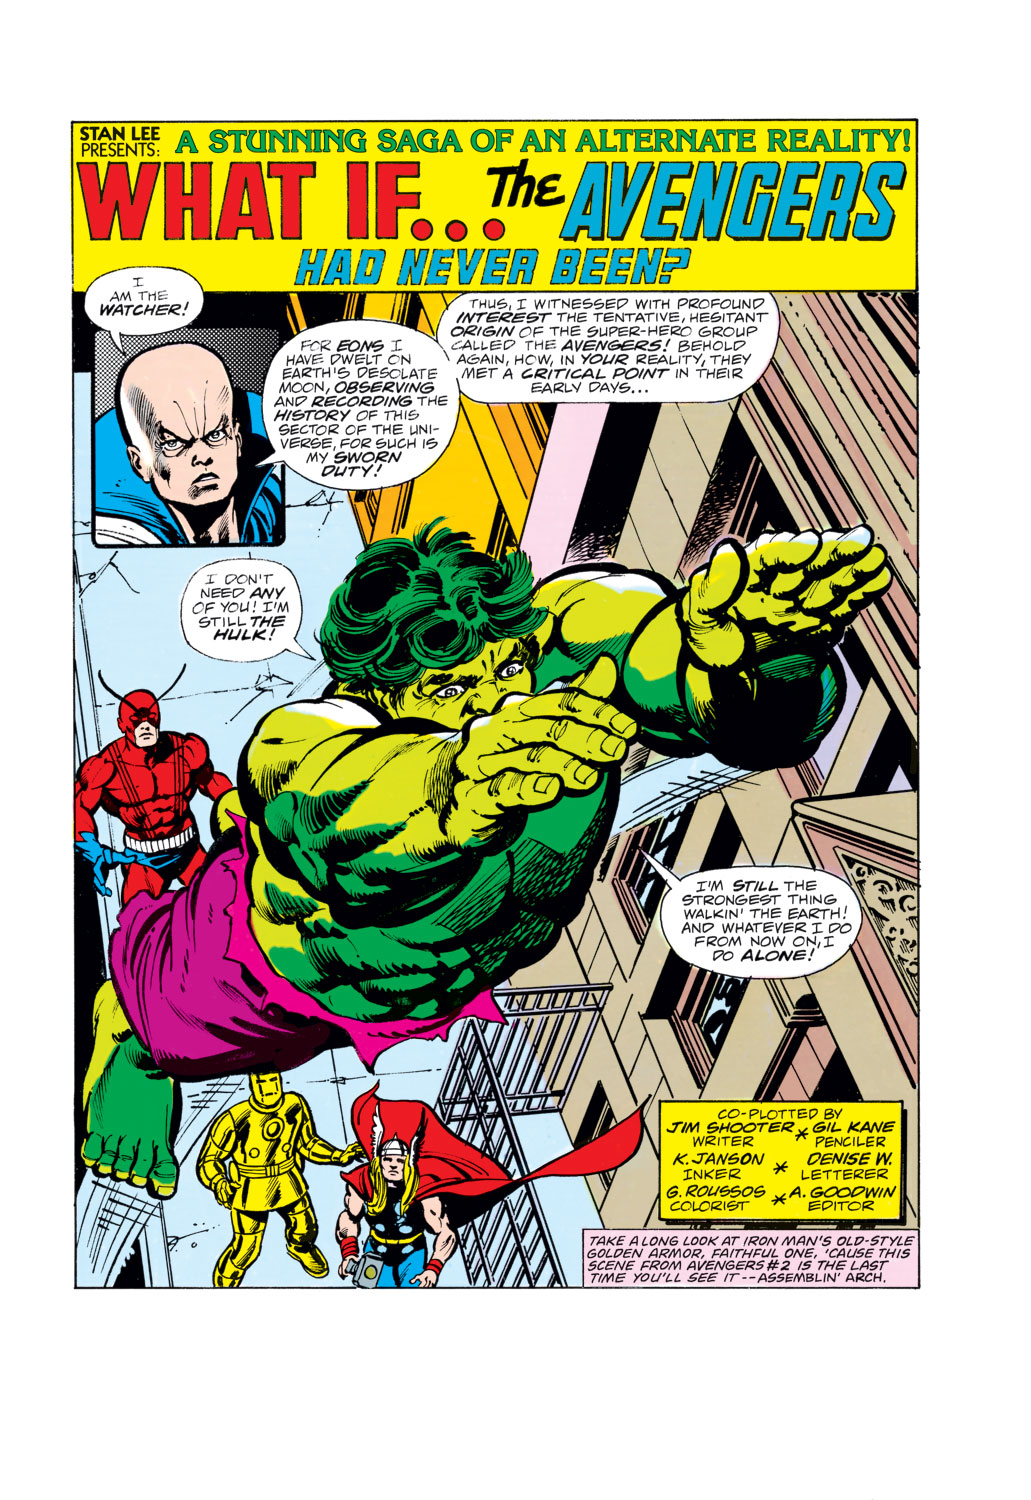 What If? (1977) issue 3 - The Avengers had never been - Page 2